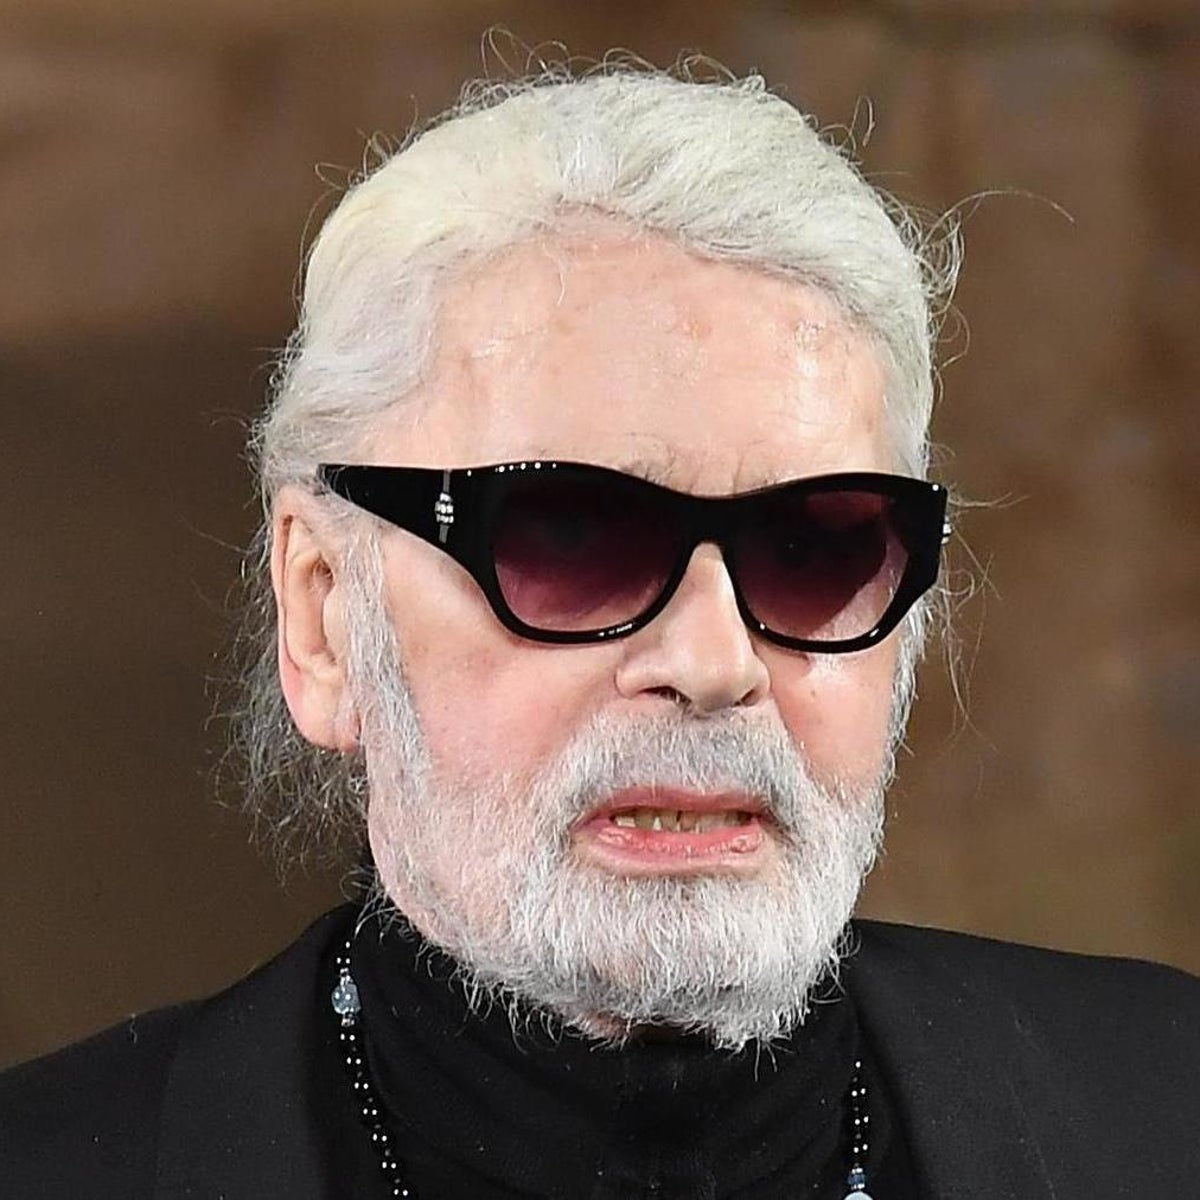 Karl Lagerfeld dead: Fashion icon and Chanel creative director dies aged 85, The Independent